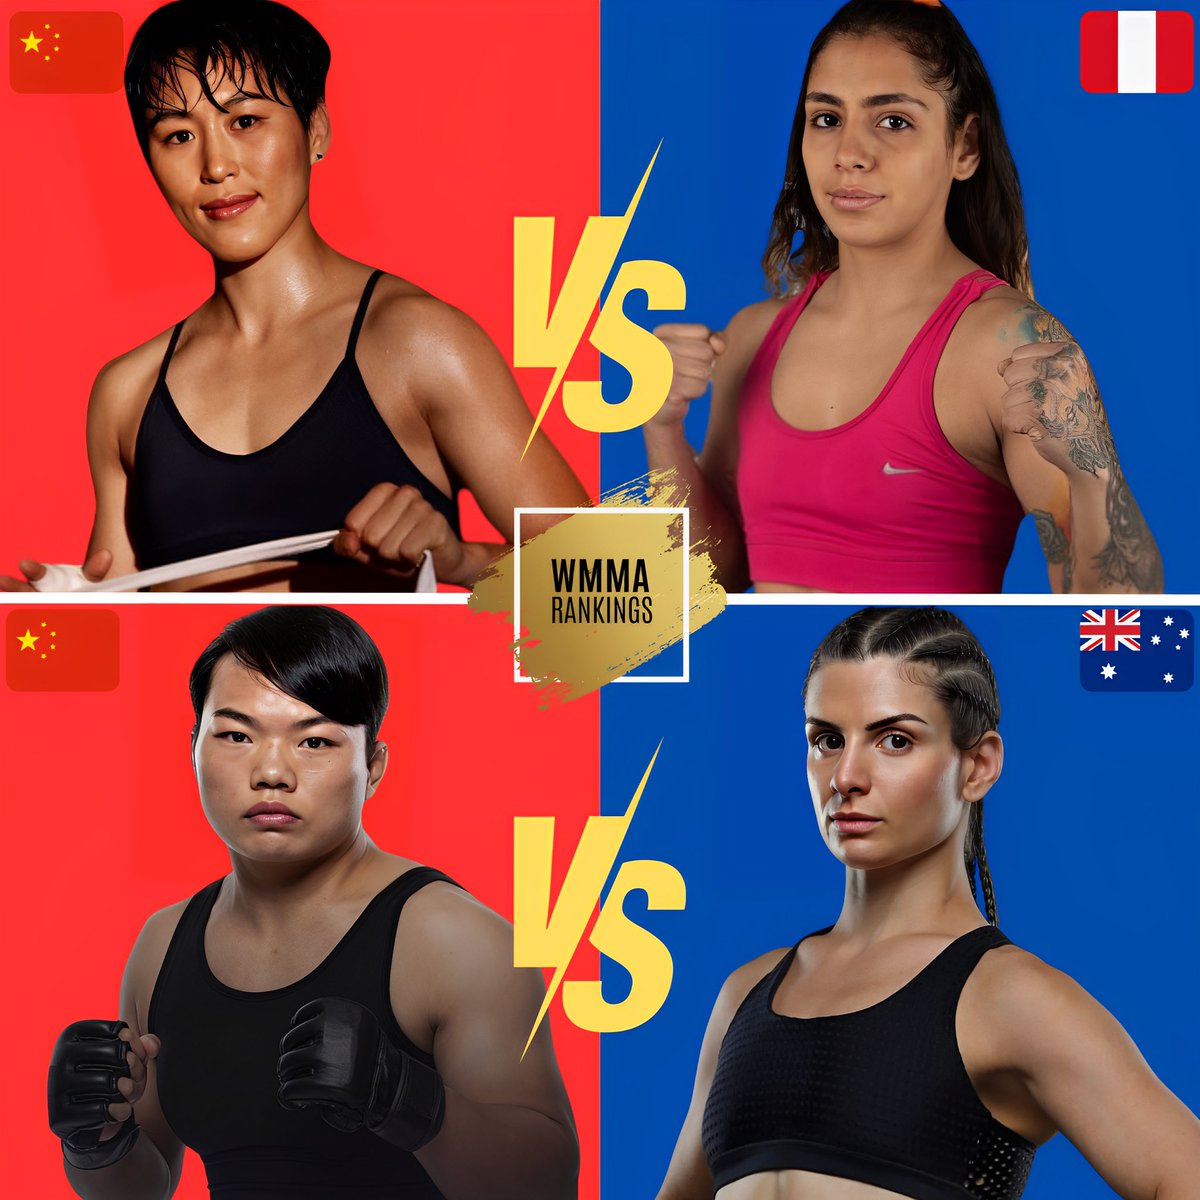 🚨 Two non-tournament fights added to the Road to UFC event on May 18-19 alongside the strawweight bouts. It's 🇨🇳 China vs. 🌎 The World in the flyweight division. 🇨🇳 Cong Wang (4-0) vs. 🇵🇪 Paula Luna (5-2) 🇨🇳 Quhui Yan (24-4) vs. 🇦🇺 Lisa Kyriacou (7-1) #WMMA #UFC #RoadToUFC